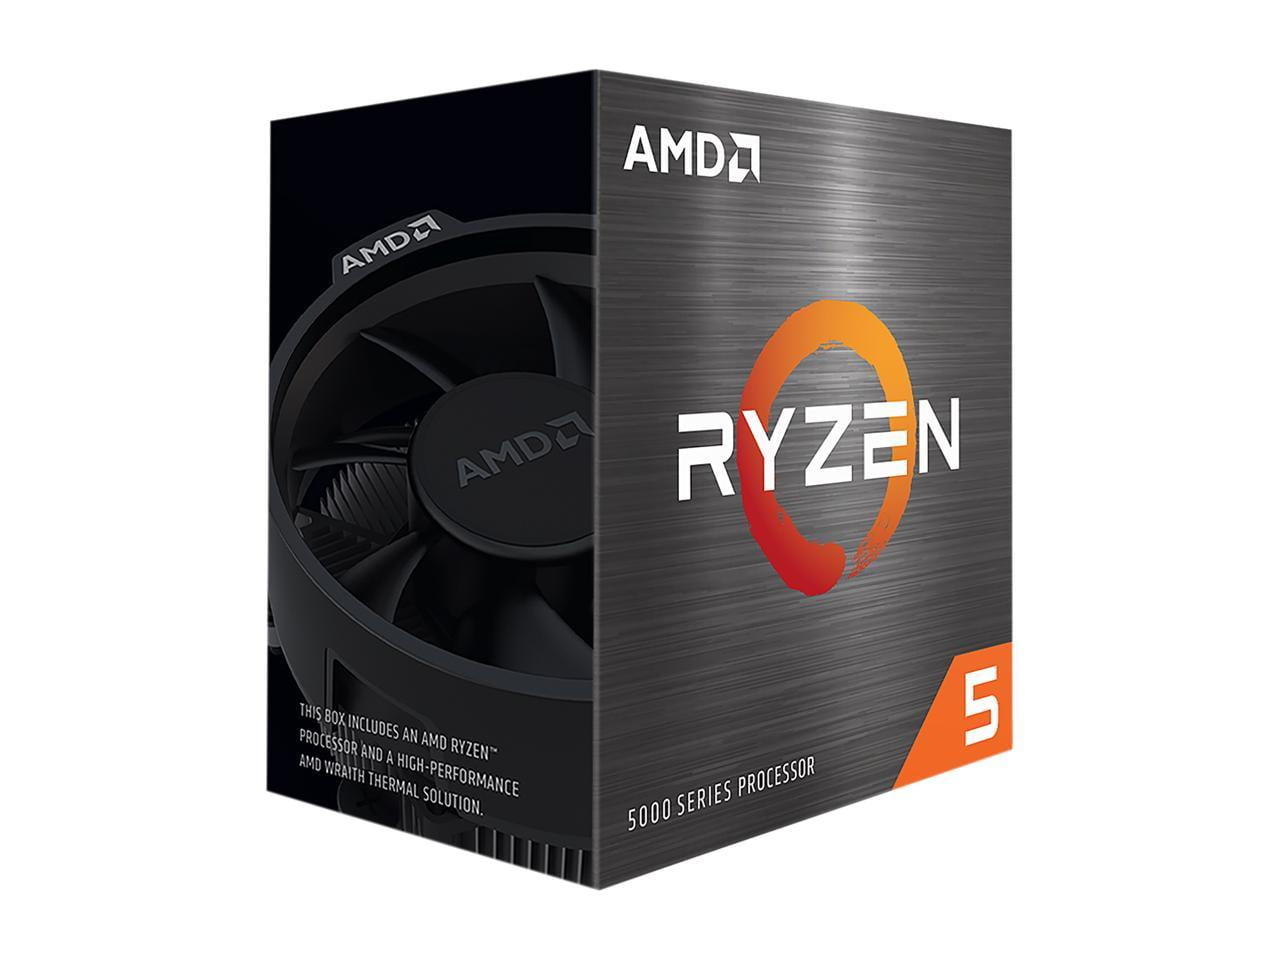 Picture of AMD 100-100000457BOX 5500 Desktop Processor 6 Cores 12 Threads 19 MB Cache 3.6 GHz Upto 4.2 GHz AM4 Socket Ryzen Chipset with Wraith Stealth Cooler